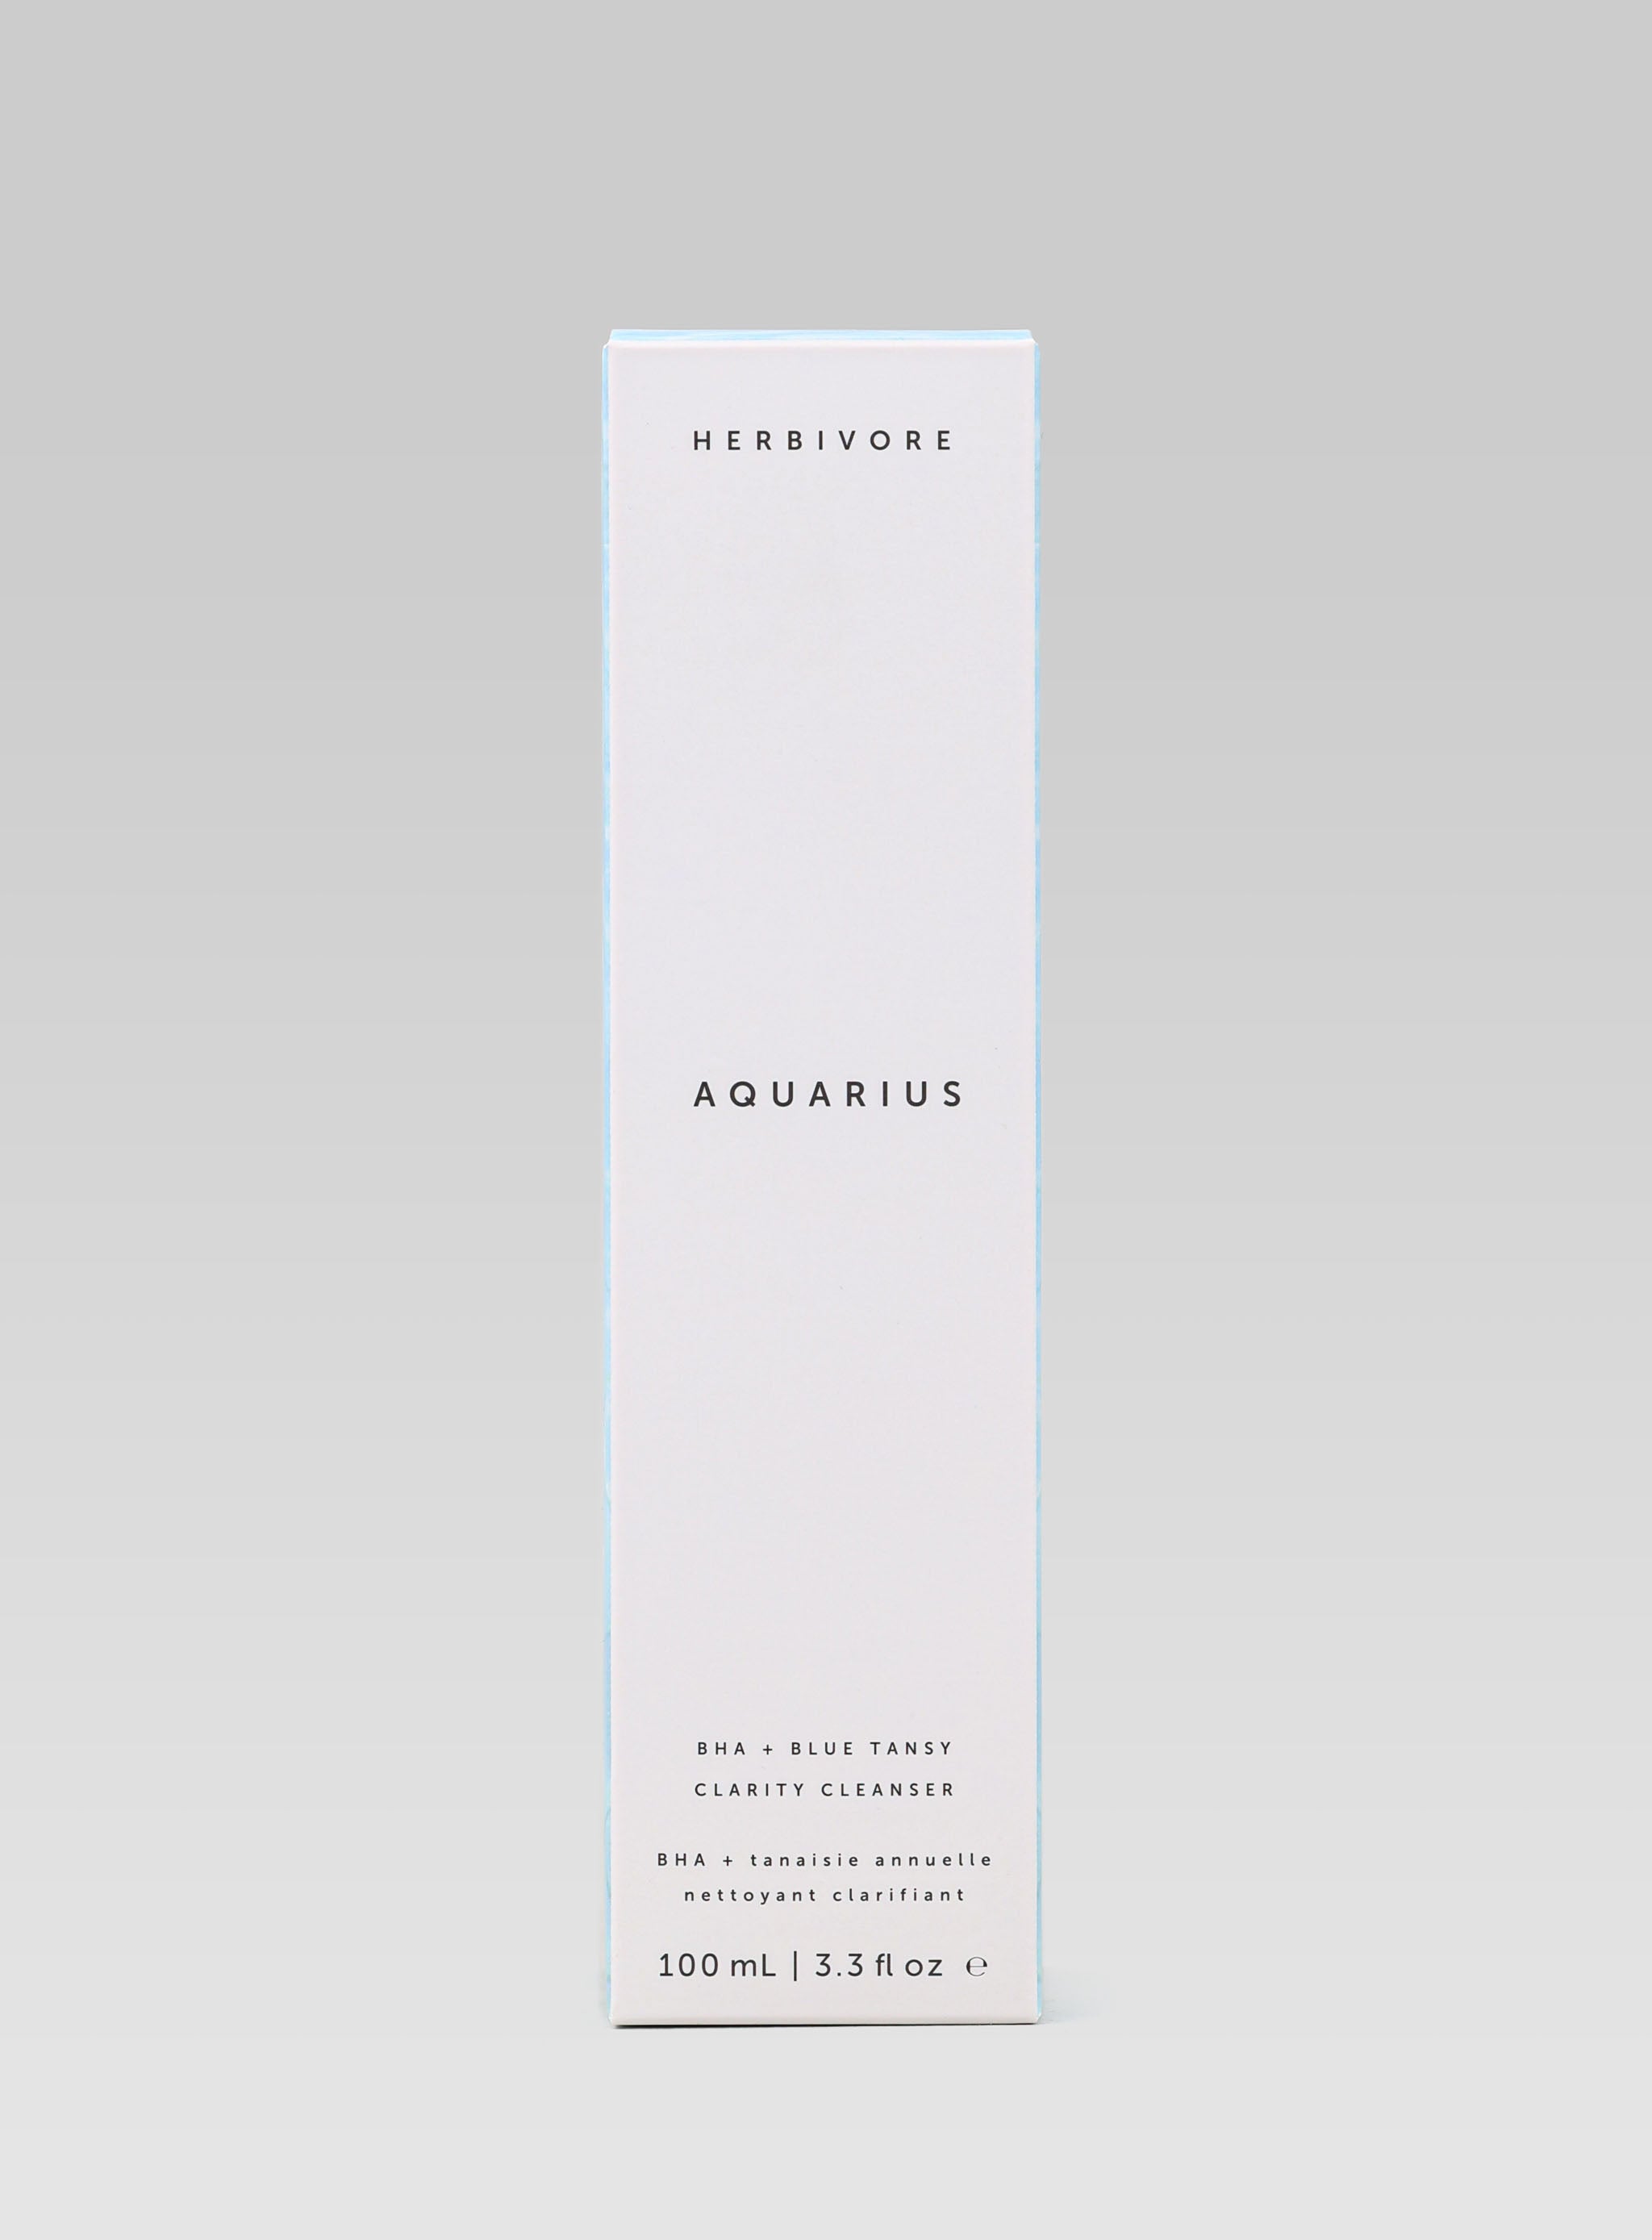 HERBIVORE BOTANICALS Aquarius BHA and Blue Tansy Clarity Cleanser Product Packaging